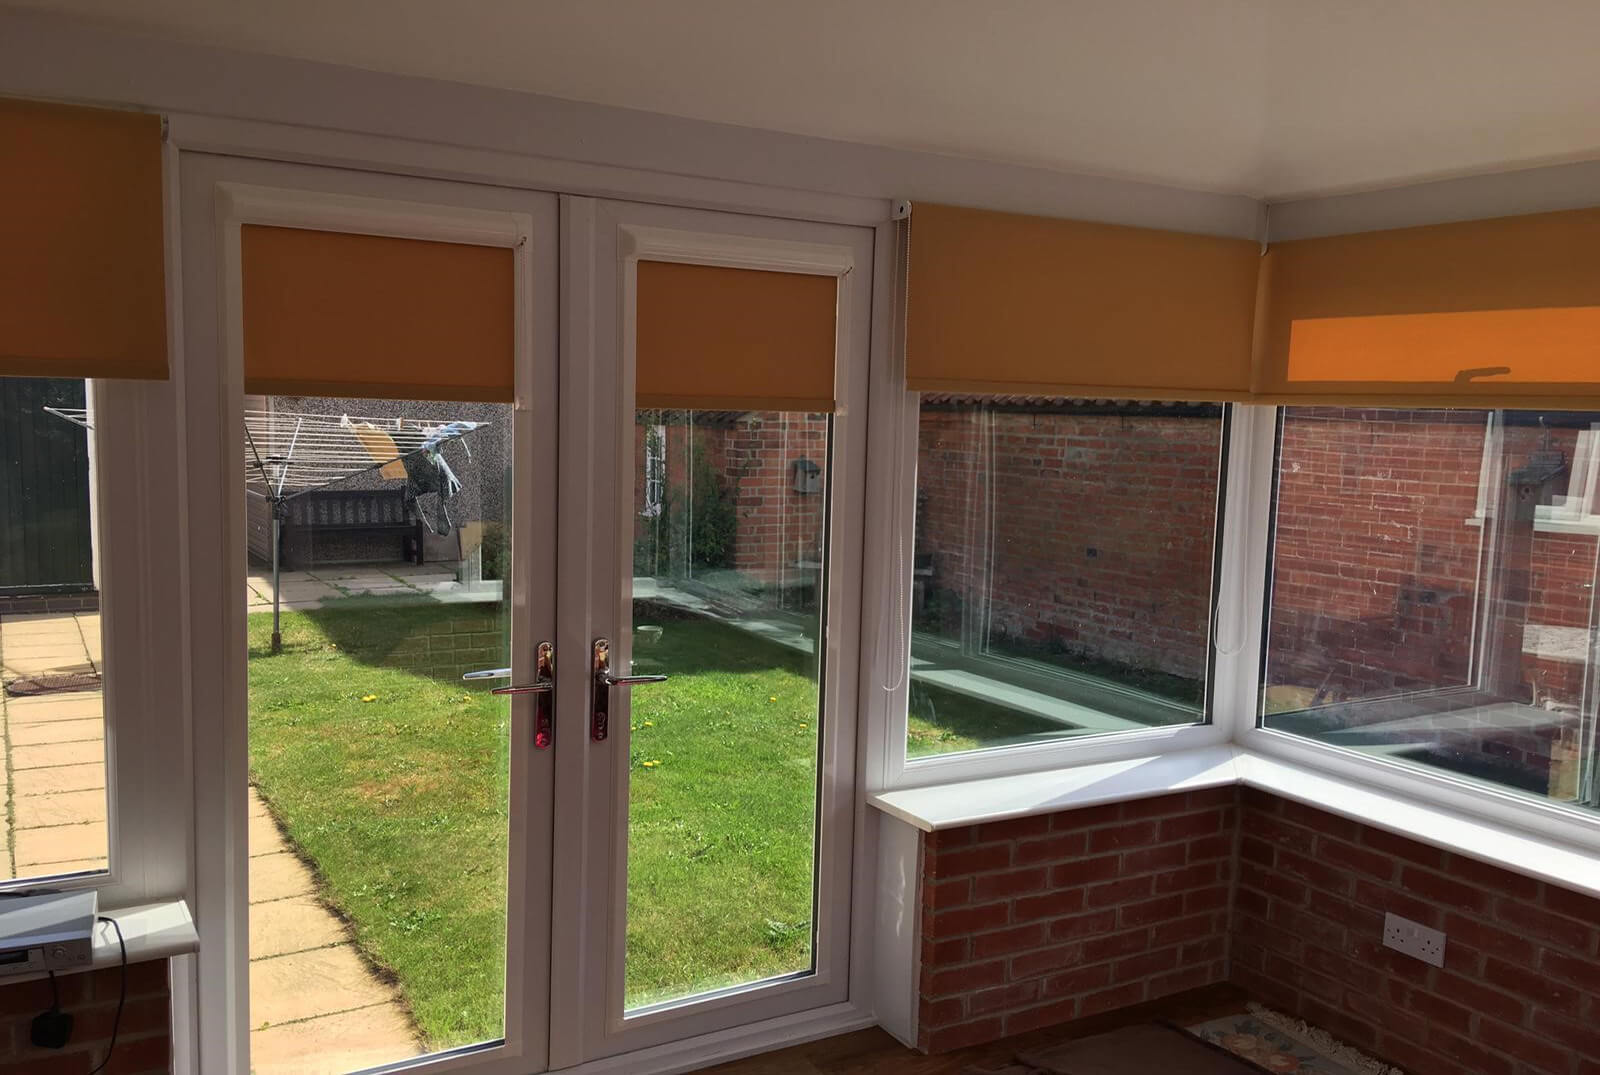 Suppliers of UPVC Windows Perfect Fit Blinds UK